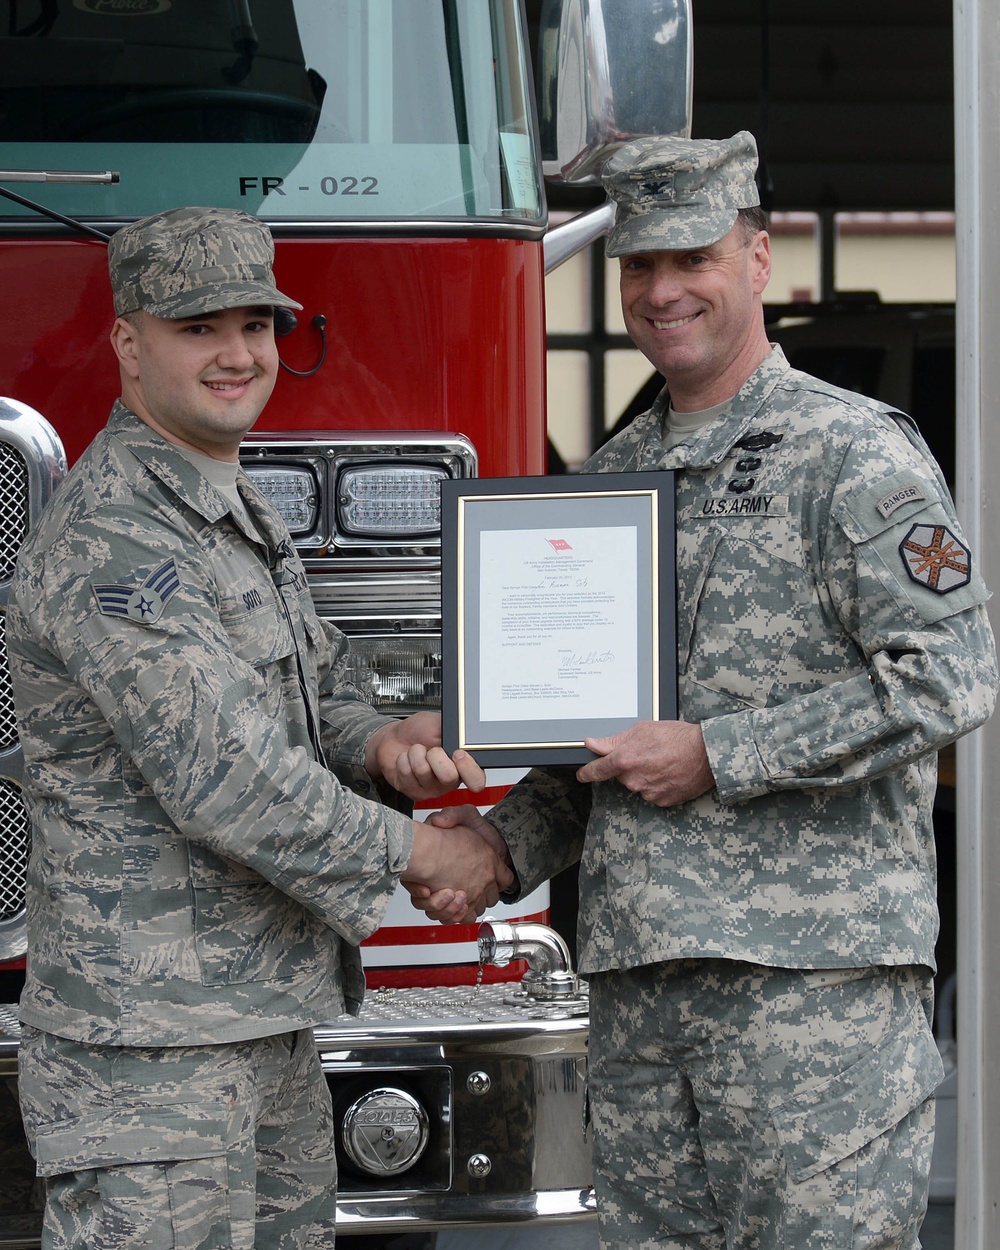 Airman awarded Army Firefighter of the Year